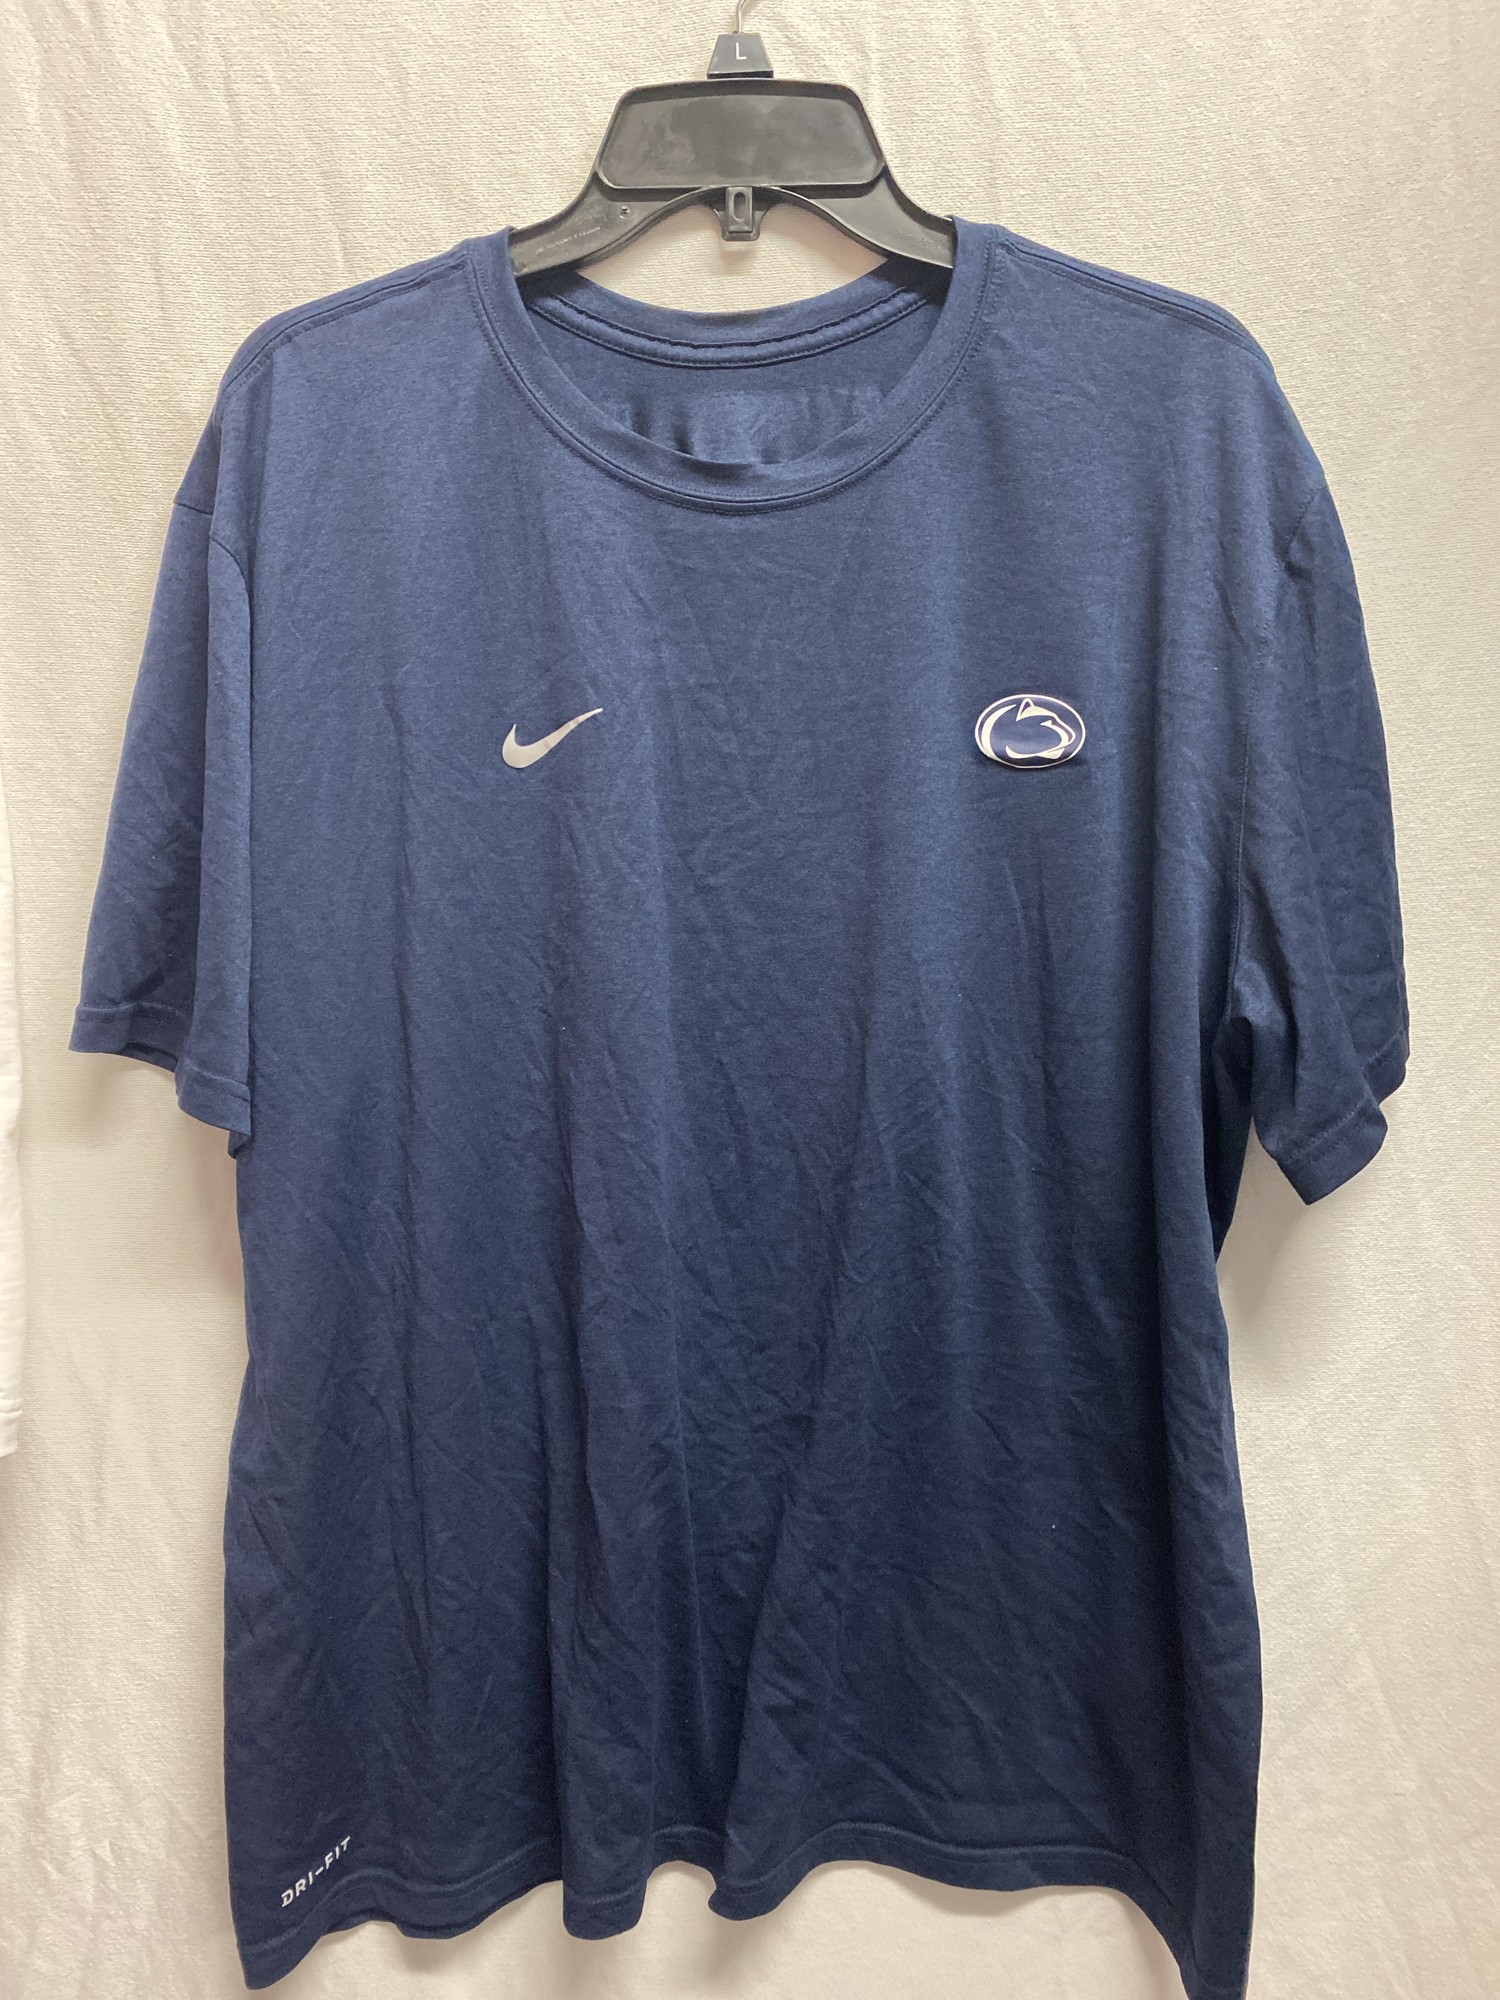 Used condition- wrinkled; faded; discoloring; previous player sticker at tag area was removed and left a mark
Blue- size 2XL